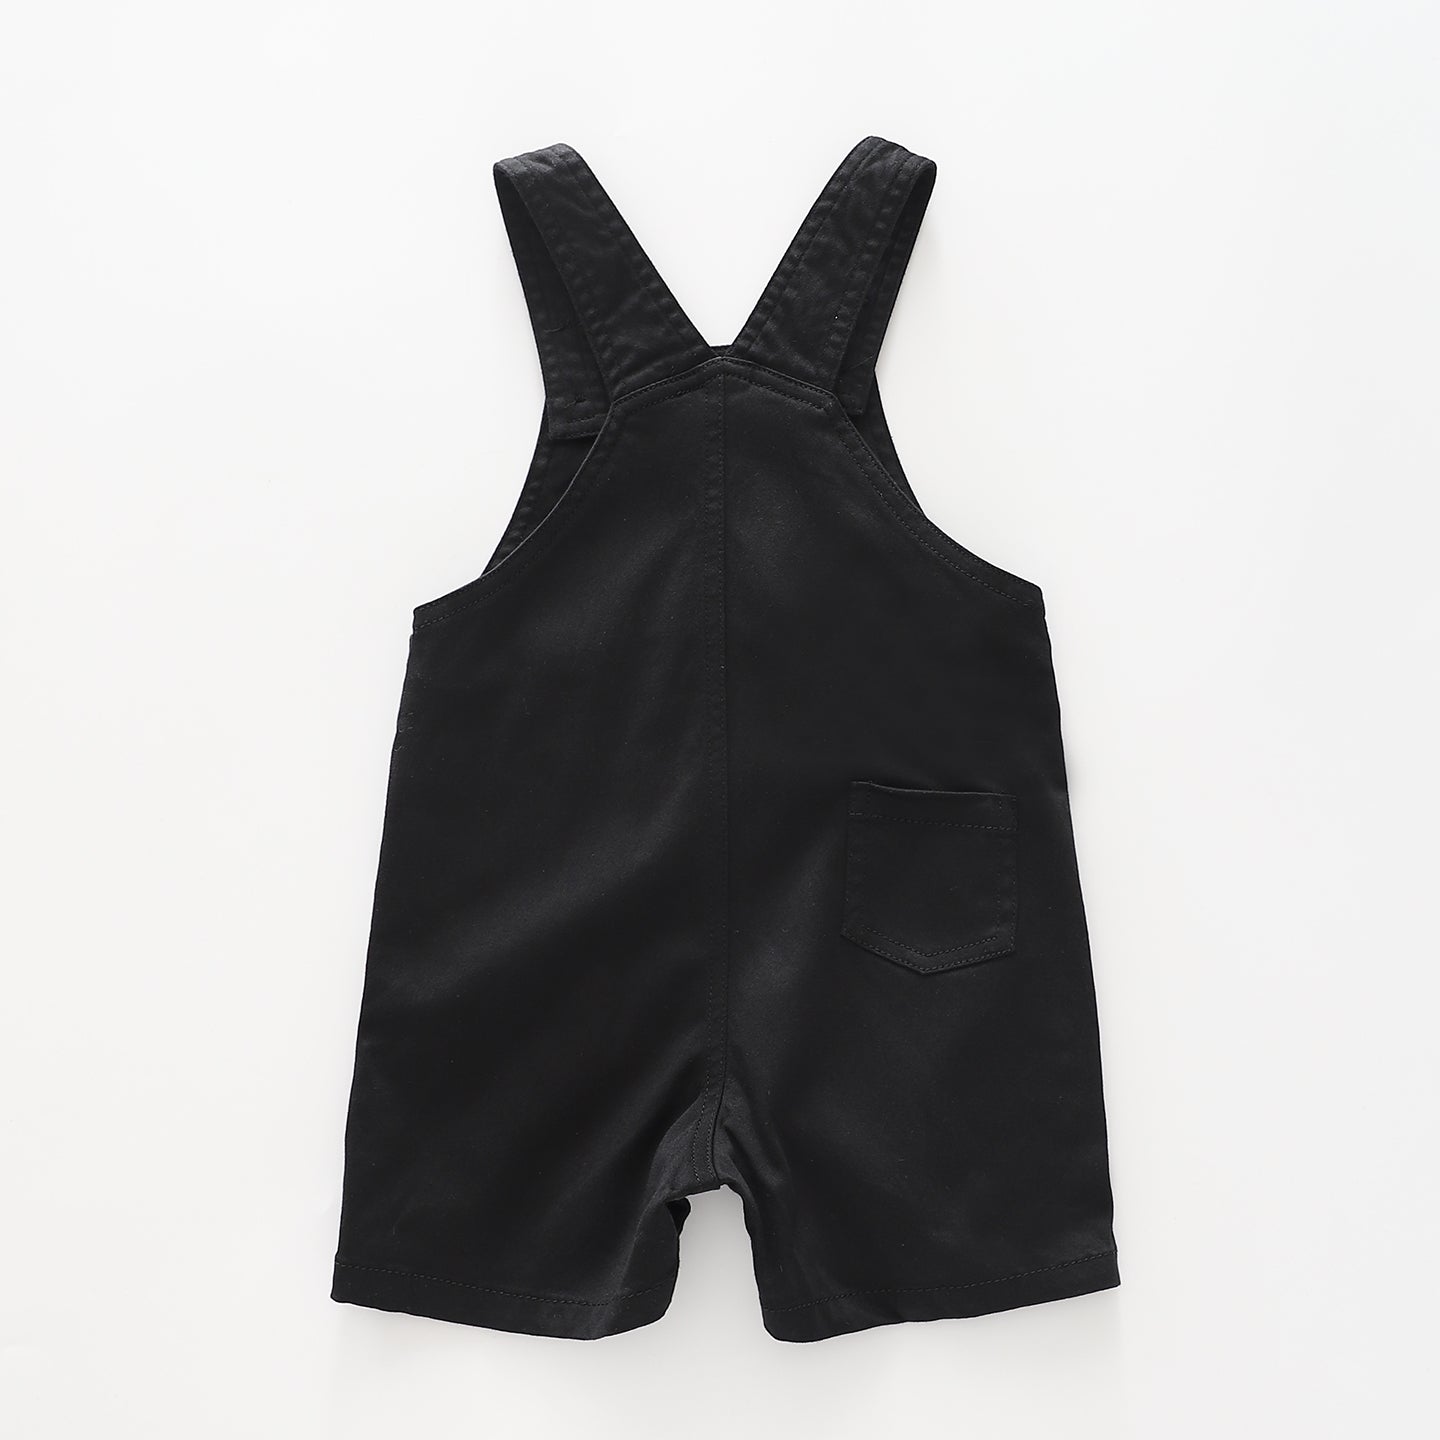 Infant and Toddler Boys Black Overalls